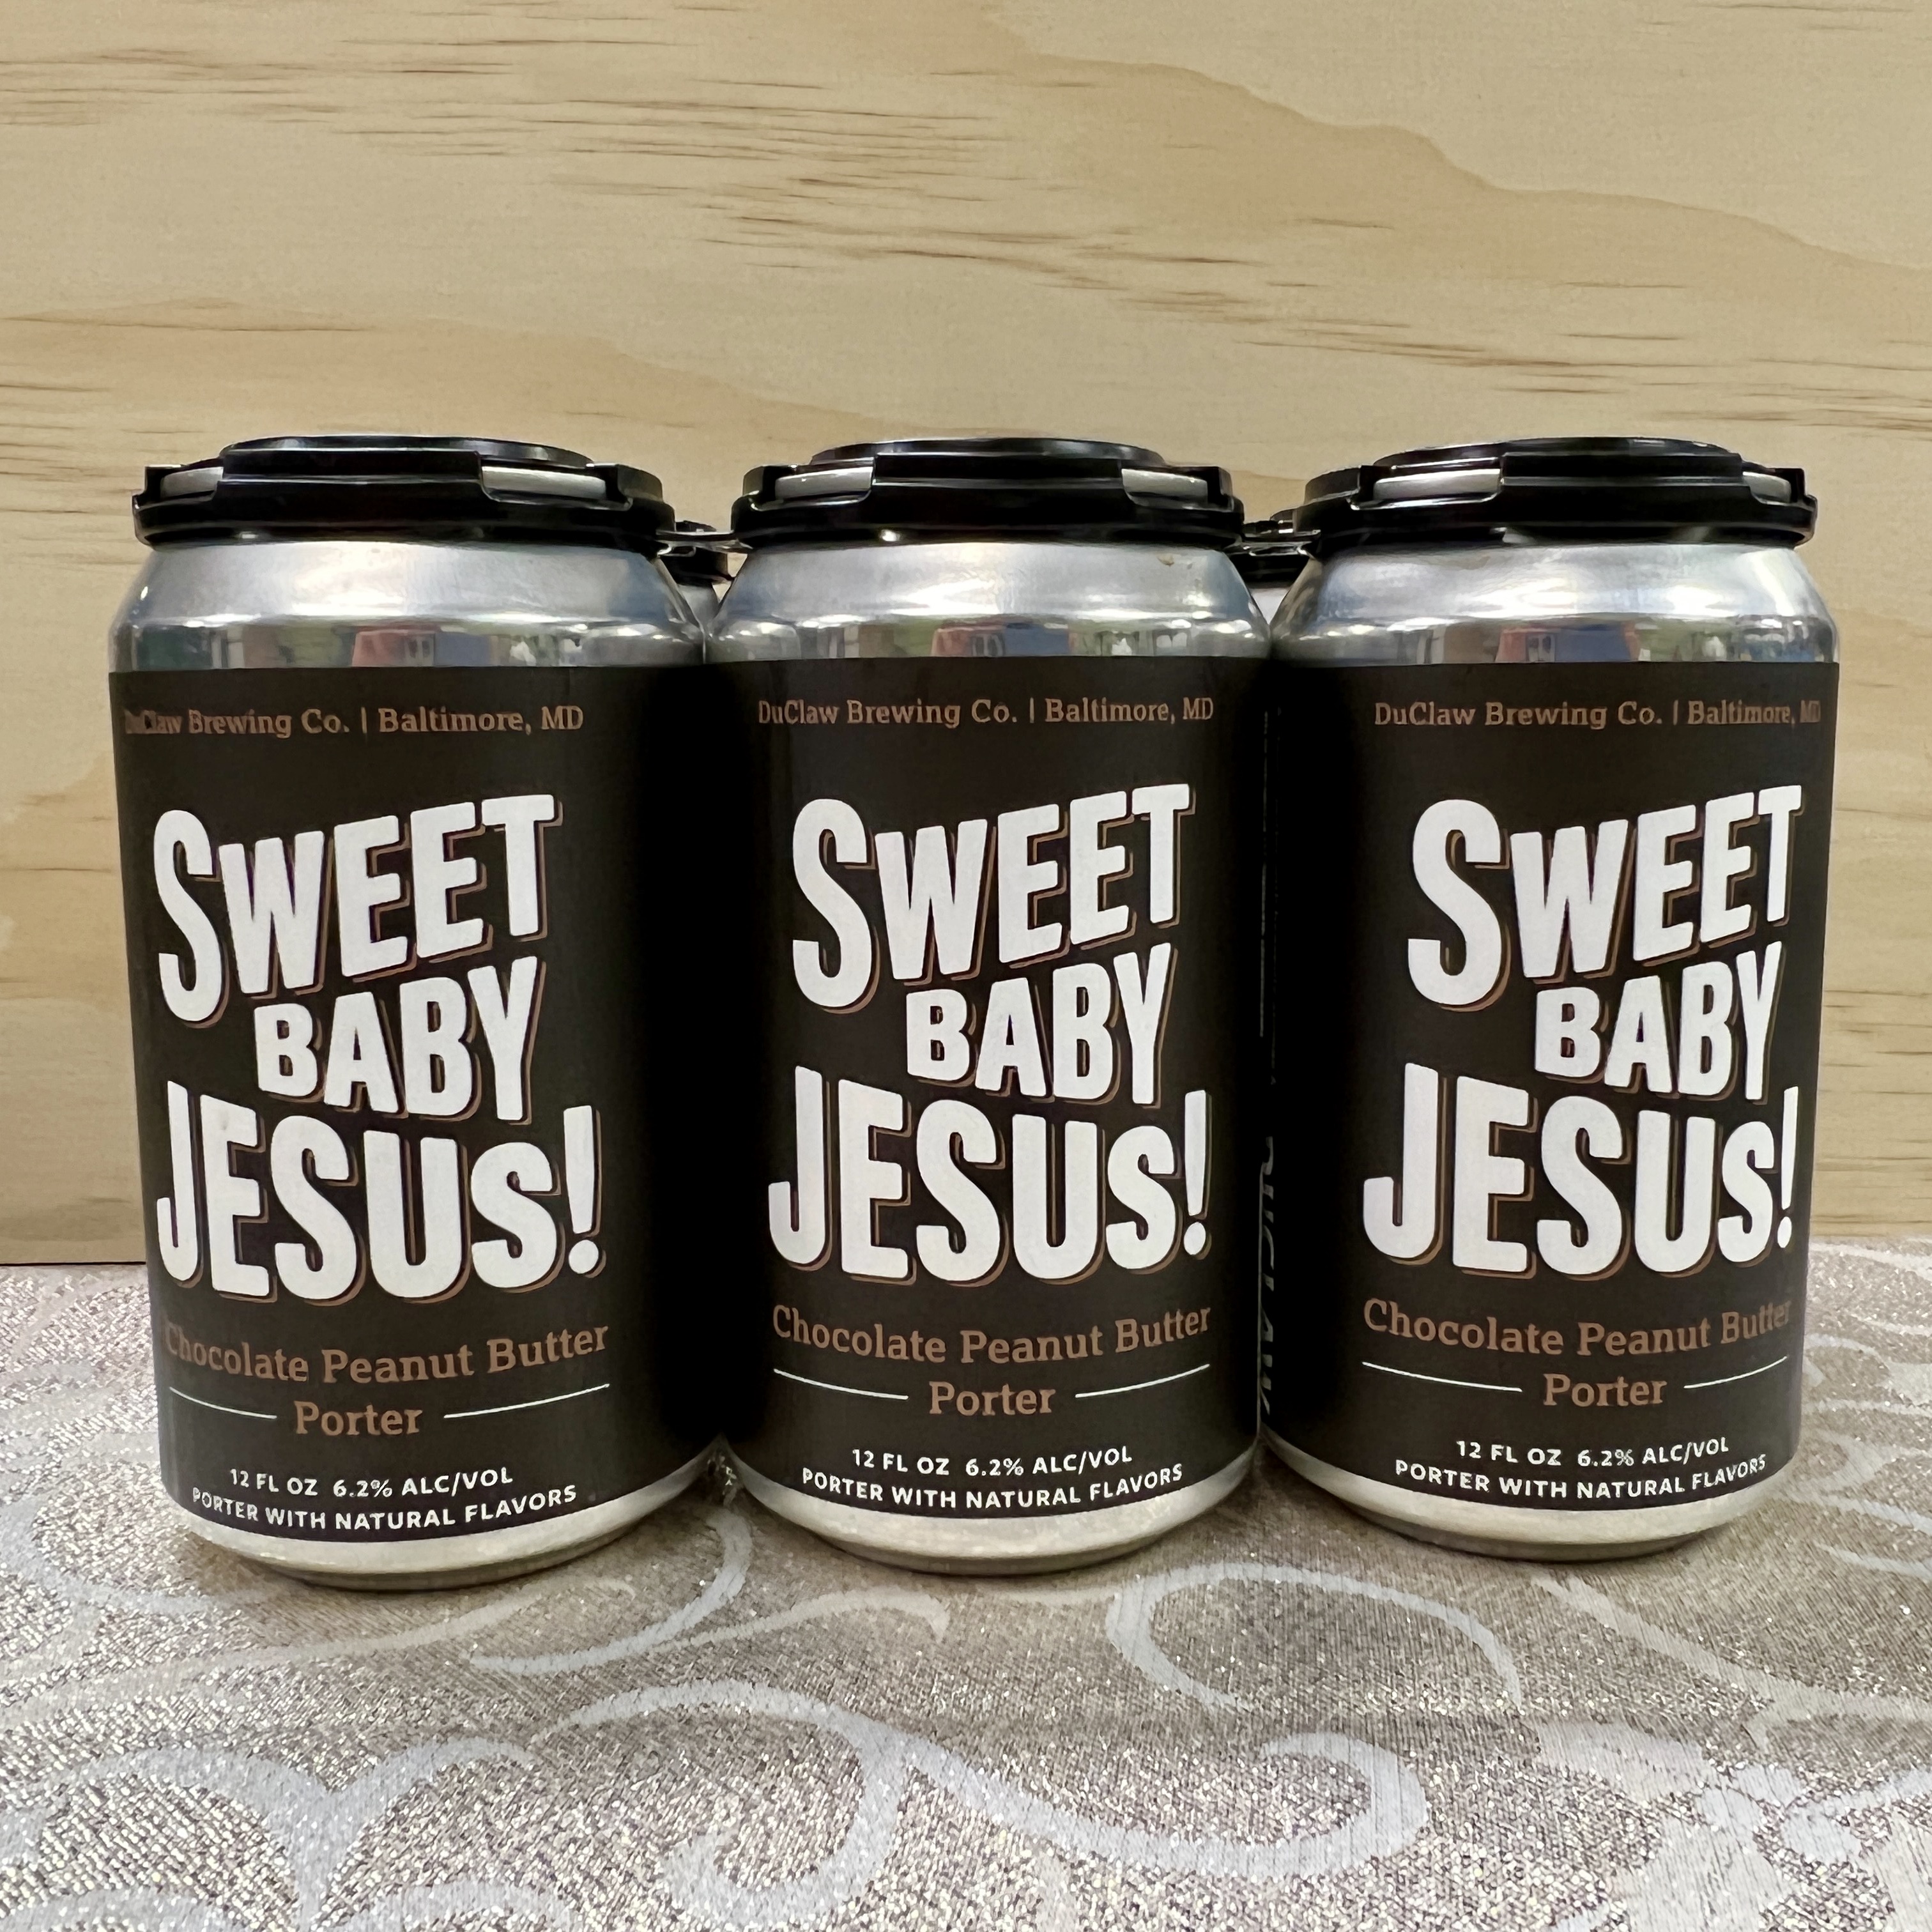 Duclaw Sweet Baby Jesus Chocolate Peanut Butter Porter 6 x 12oz cans